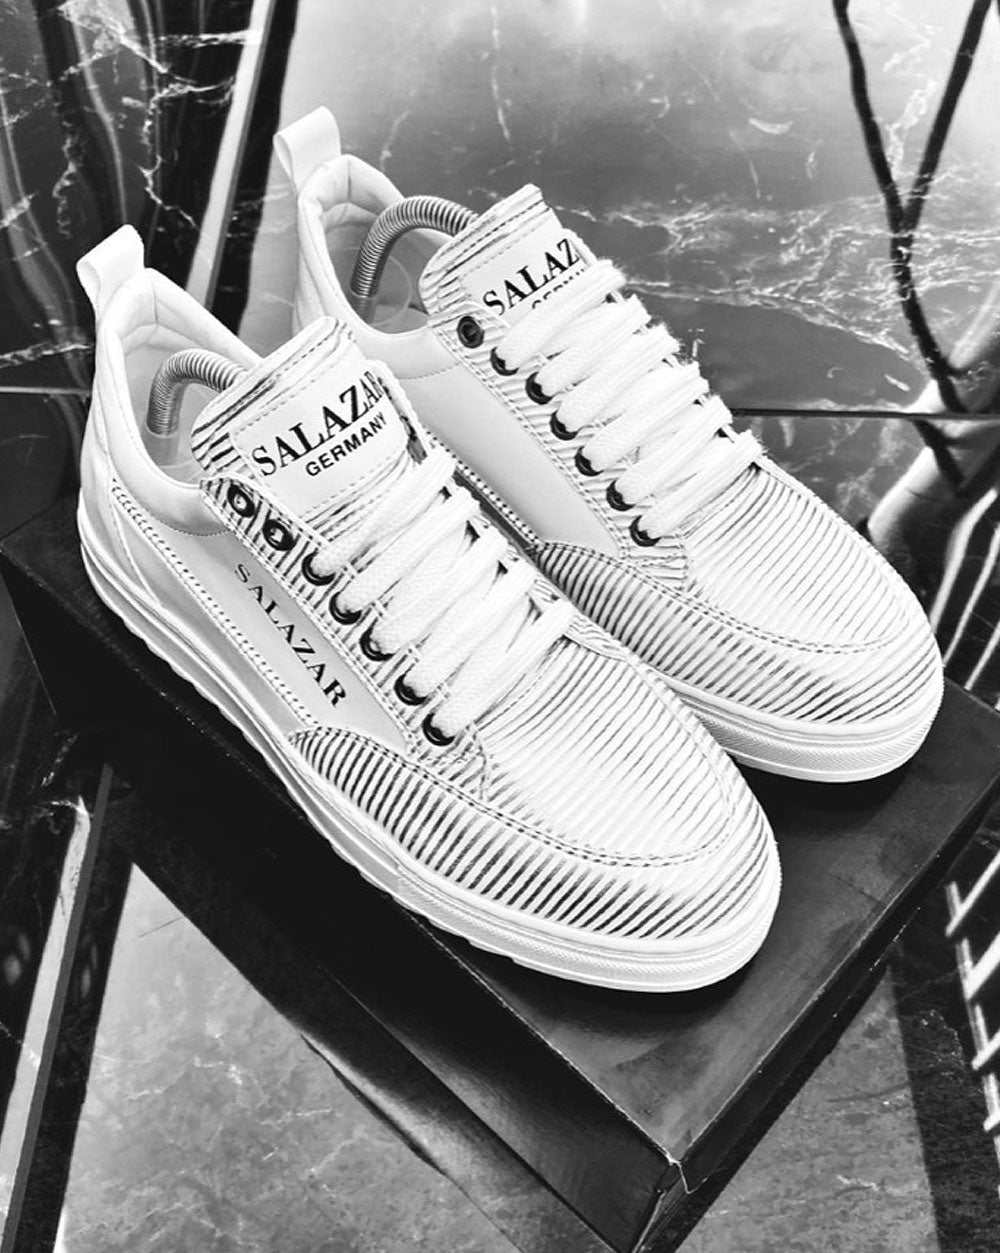 Chaussures basket blanches nervuré tendance sneakers homme